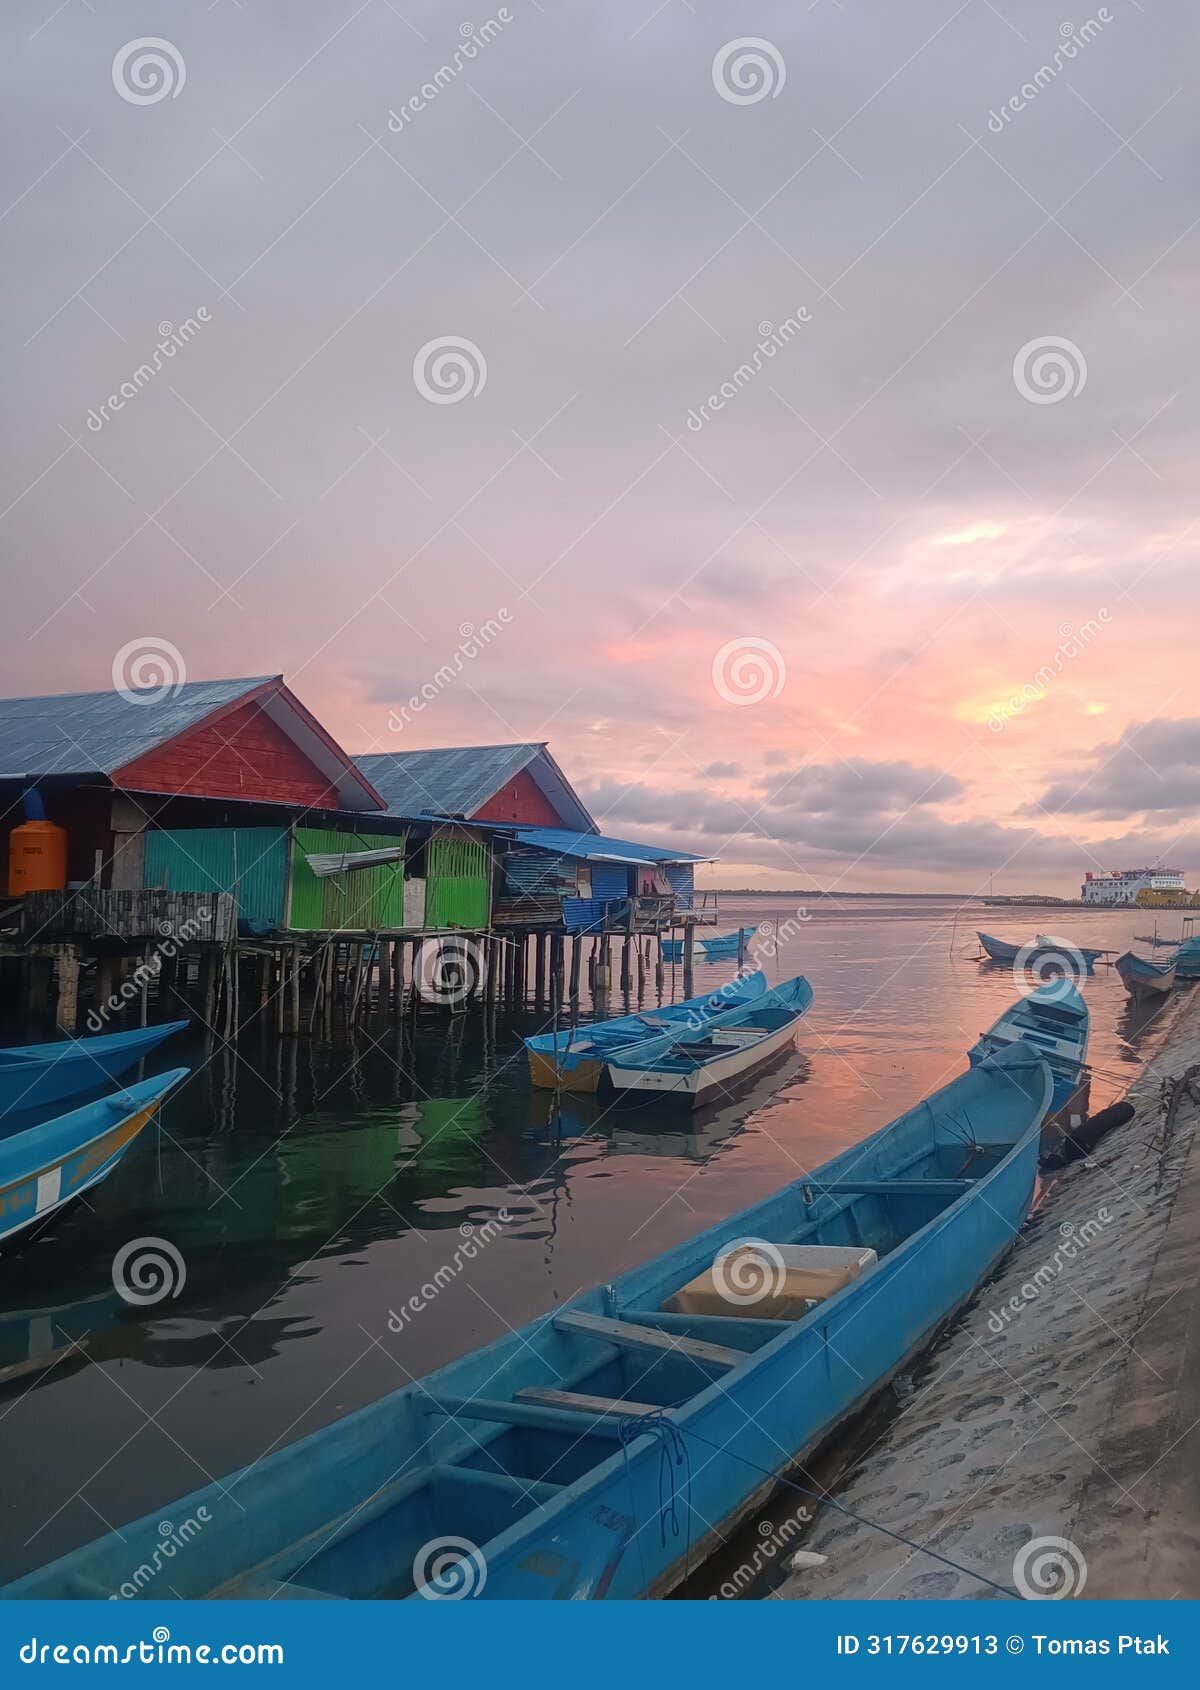 sorong harbour during sunset - entrypoint to raja ampat archipelago, west papua